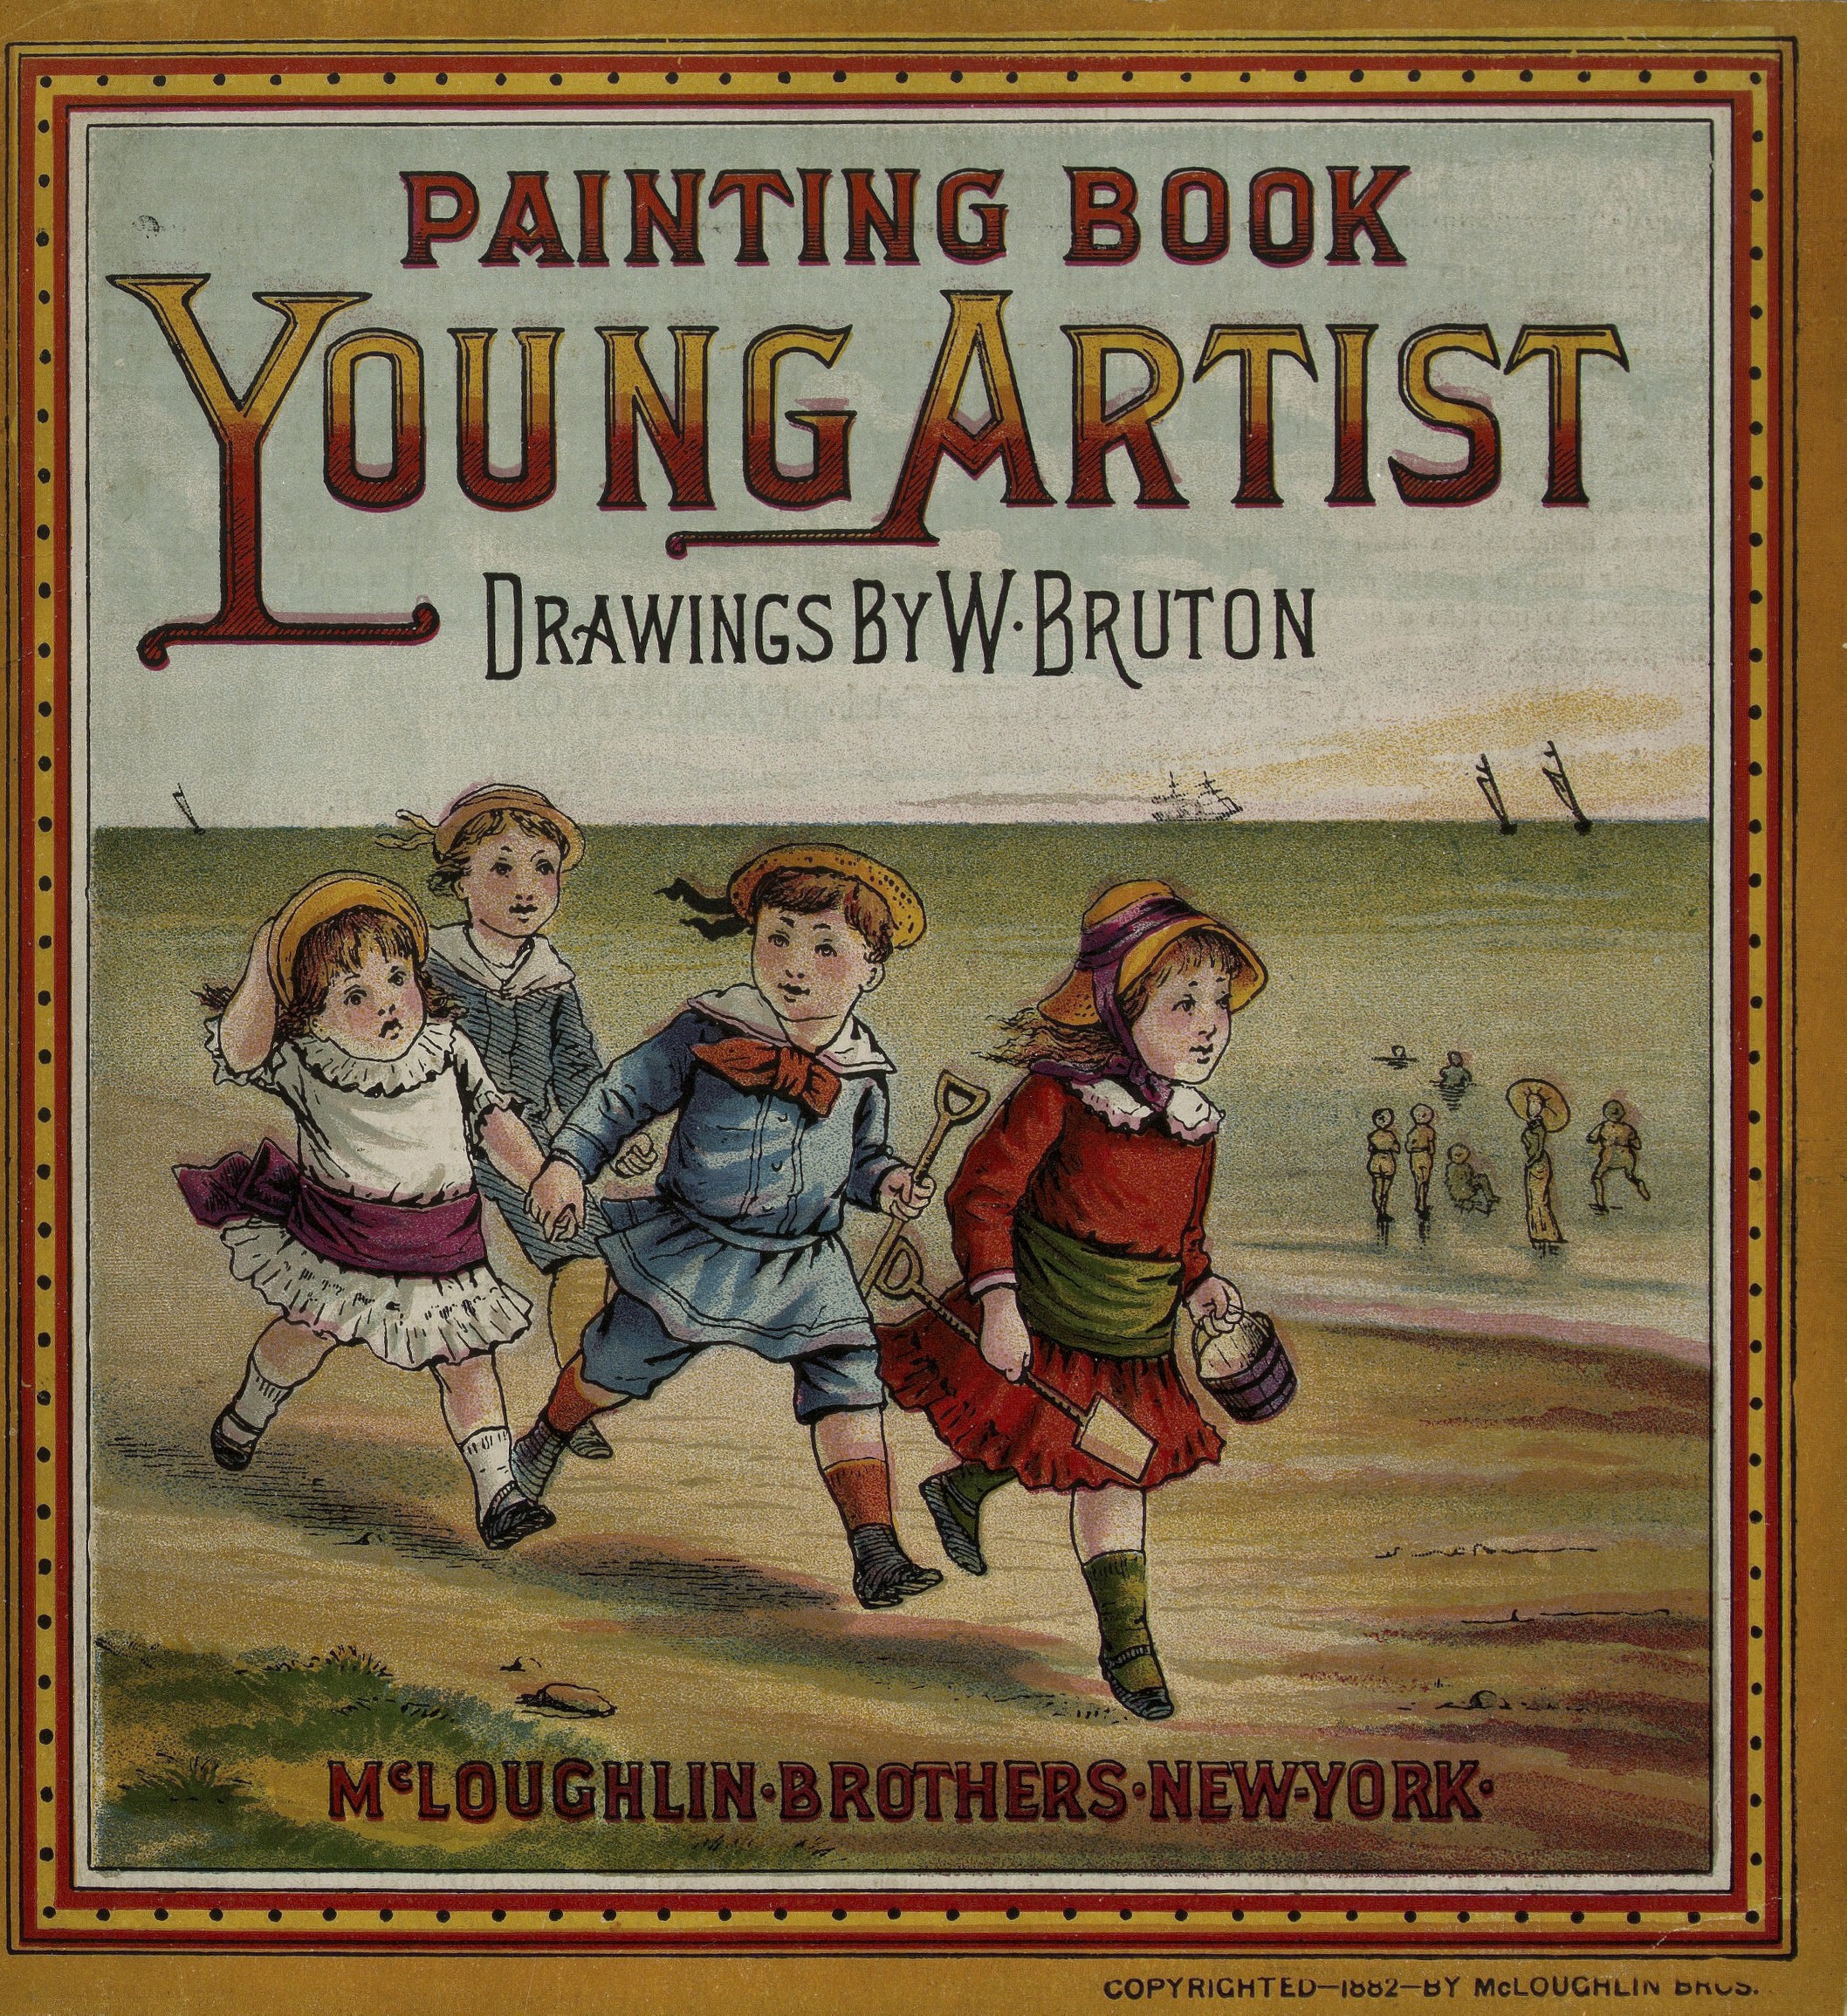 Young Artist Painting Book, c.1882. Content compilation © 2020, by the American Antiquarian Society. All rights reserved.